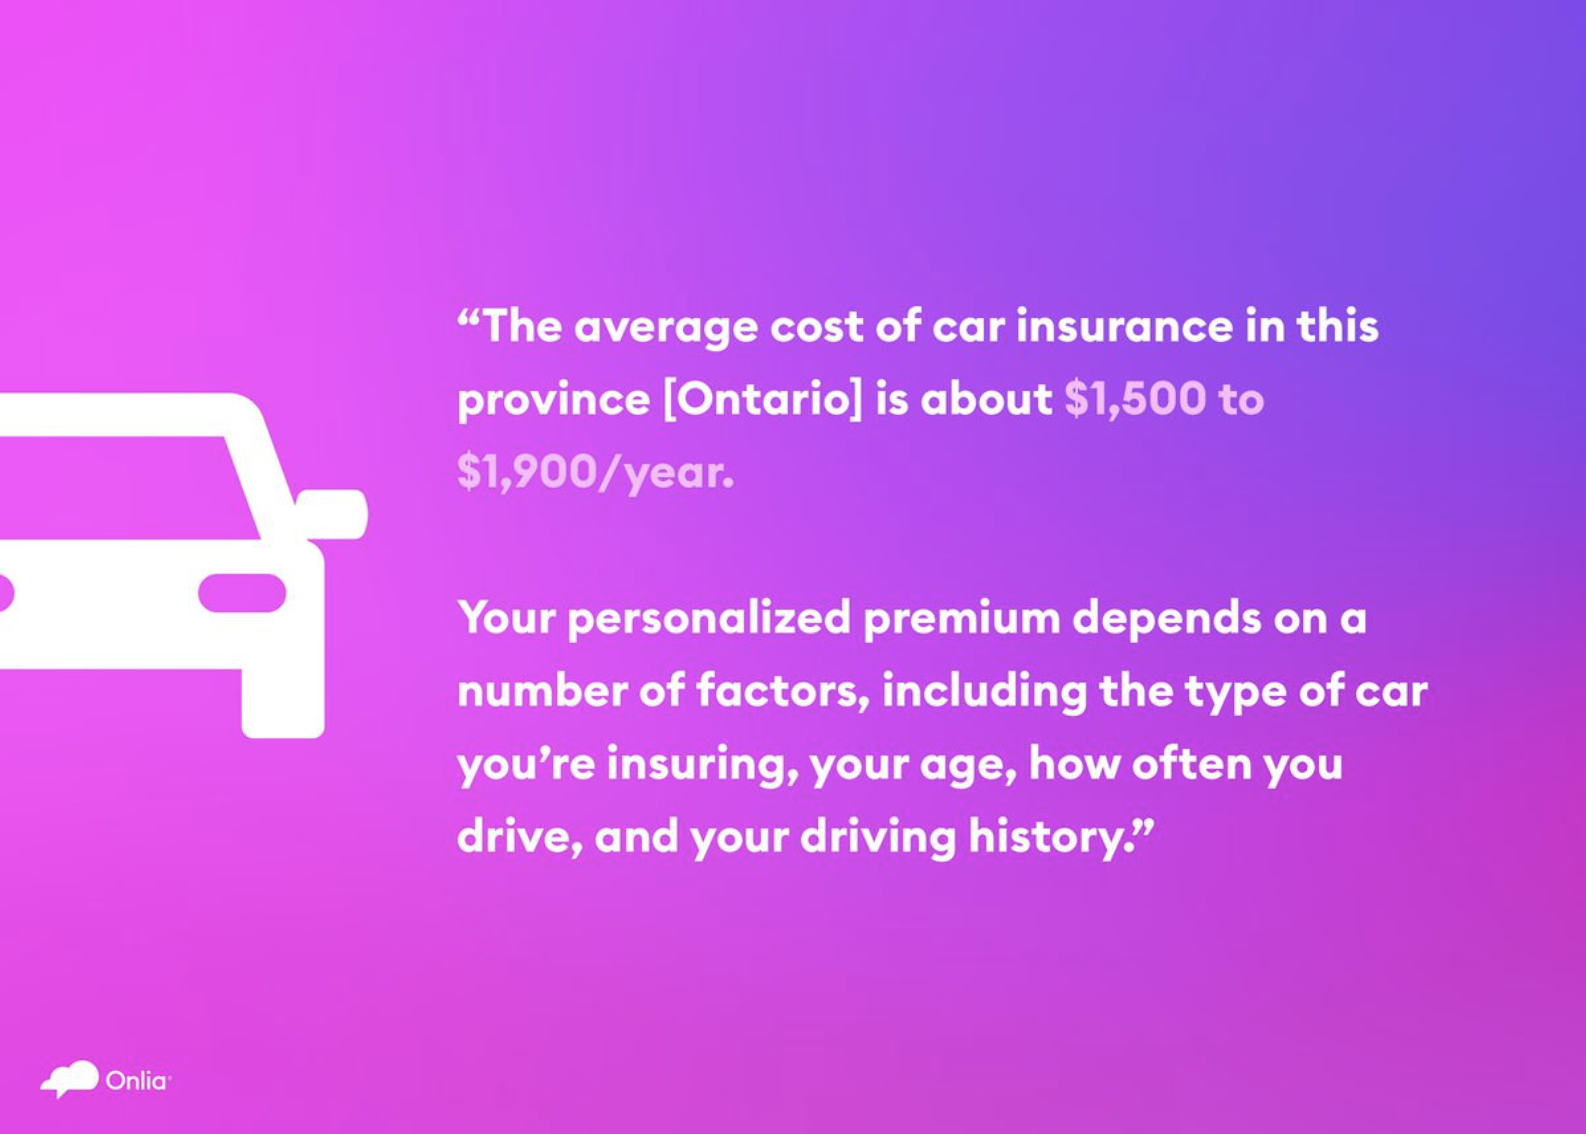 Average cost of car insurance in Ontario